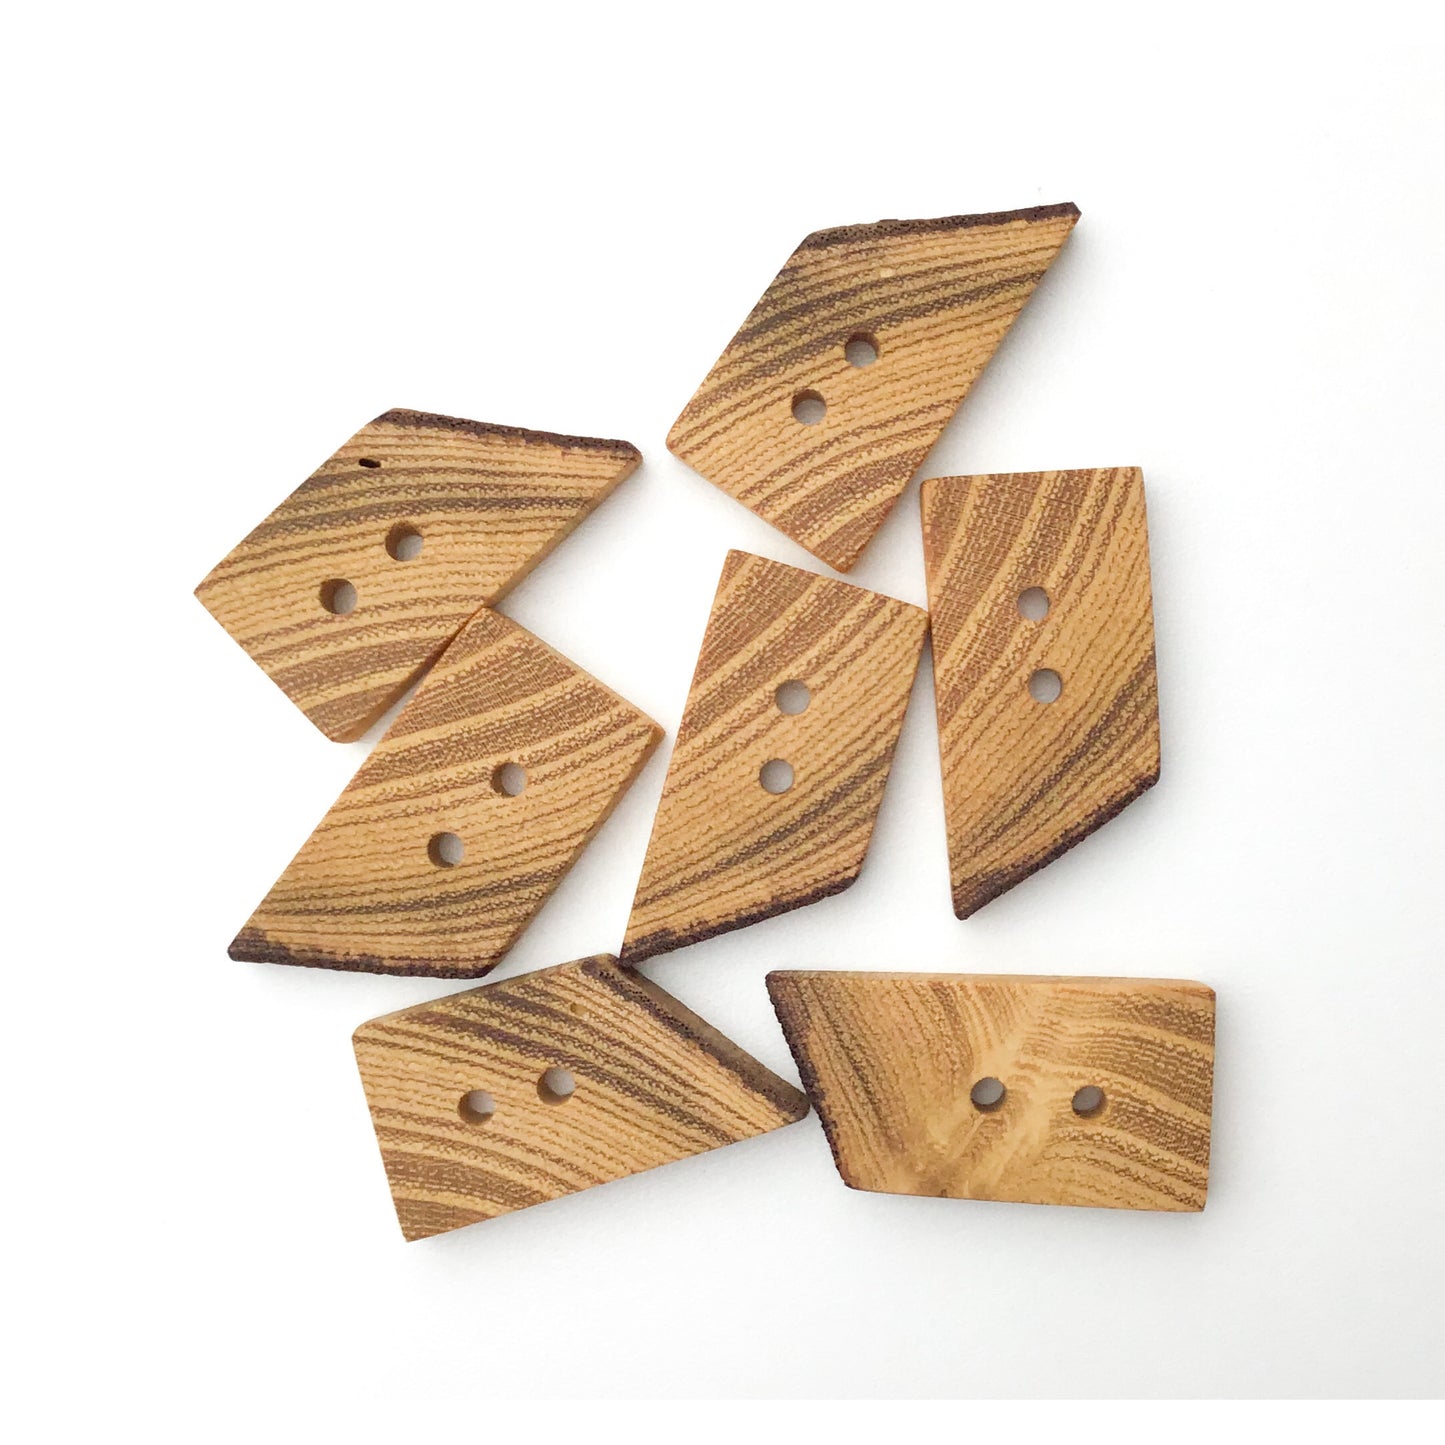 Black Locust Wood Buttons - Live Edge Wood Buttons - Wood Toggle Buttons - 3/4" x 1 1/2"